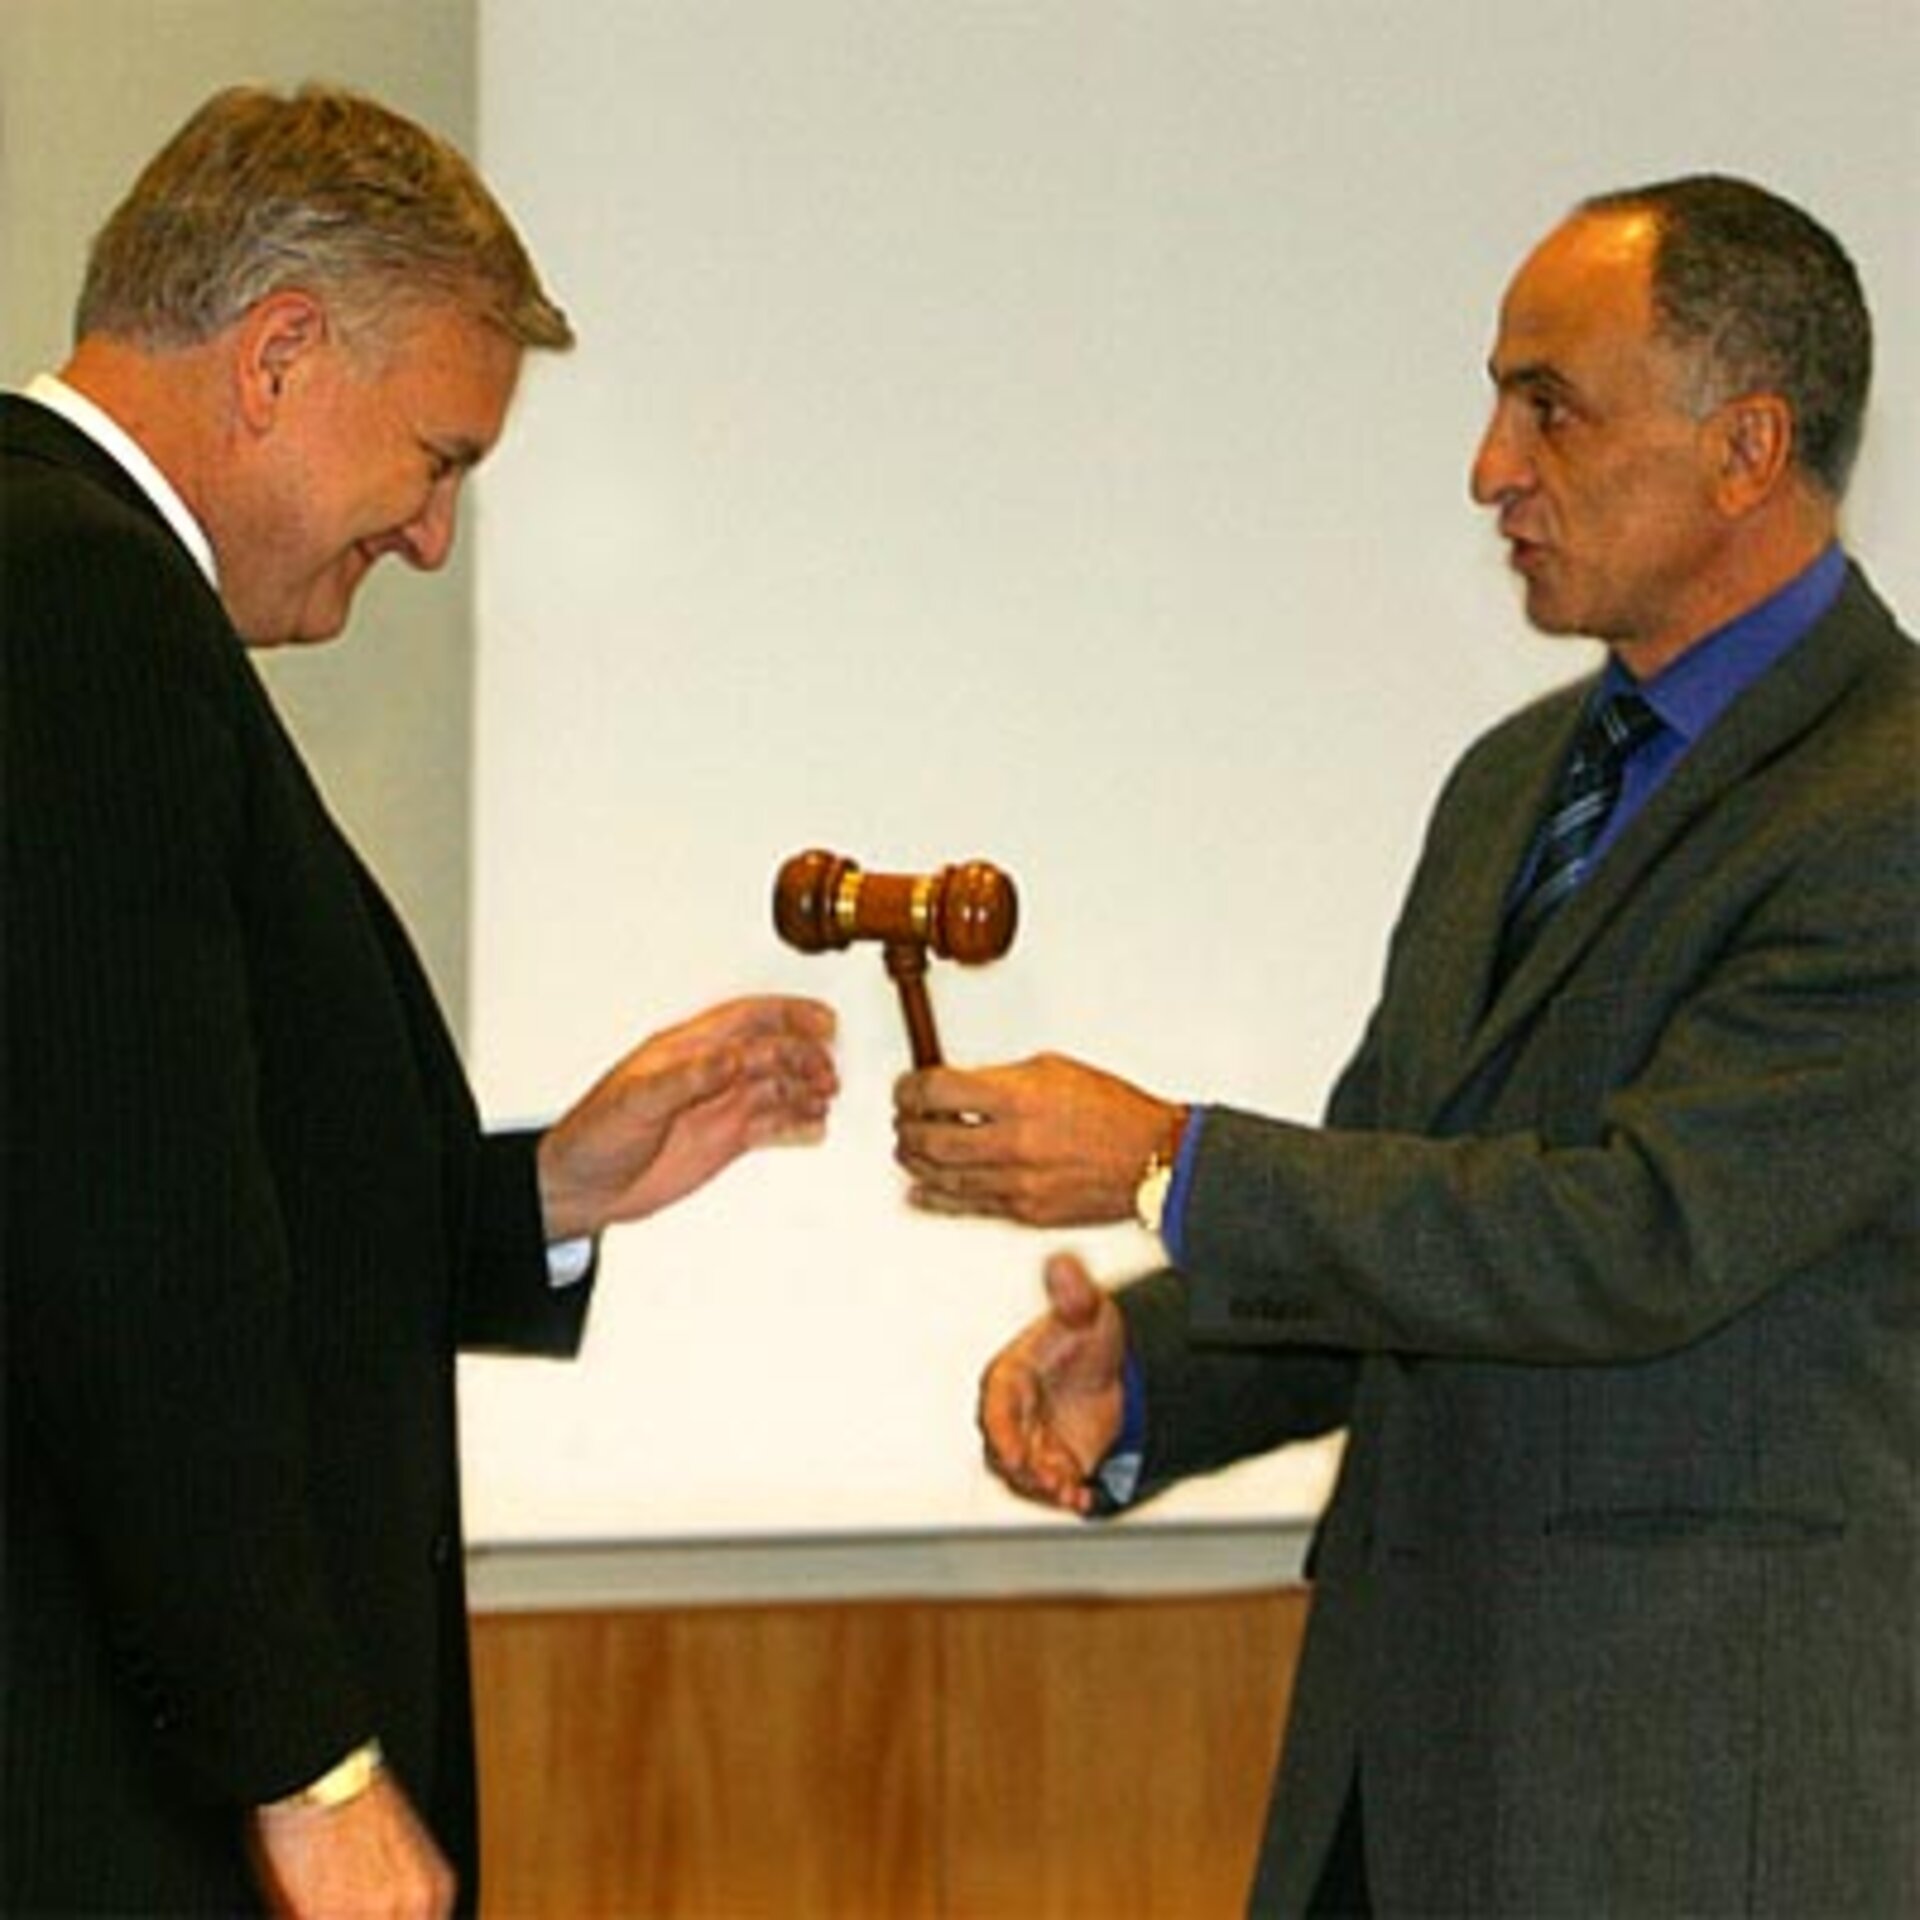 ESA's Achache (right) hands over CEOS gavel to Withee of NOAA